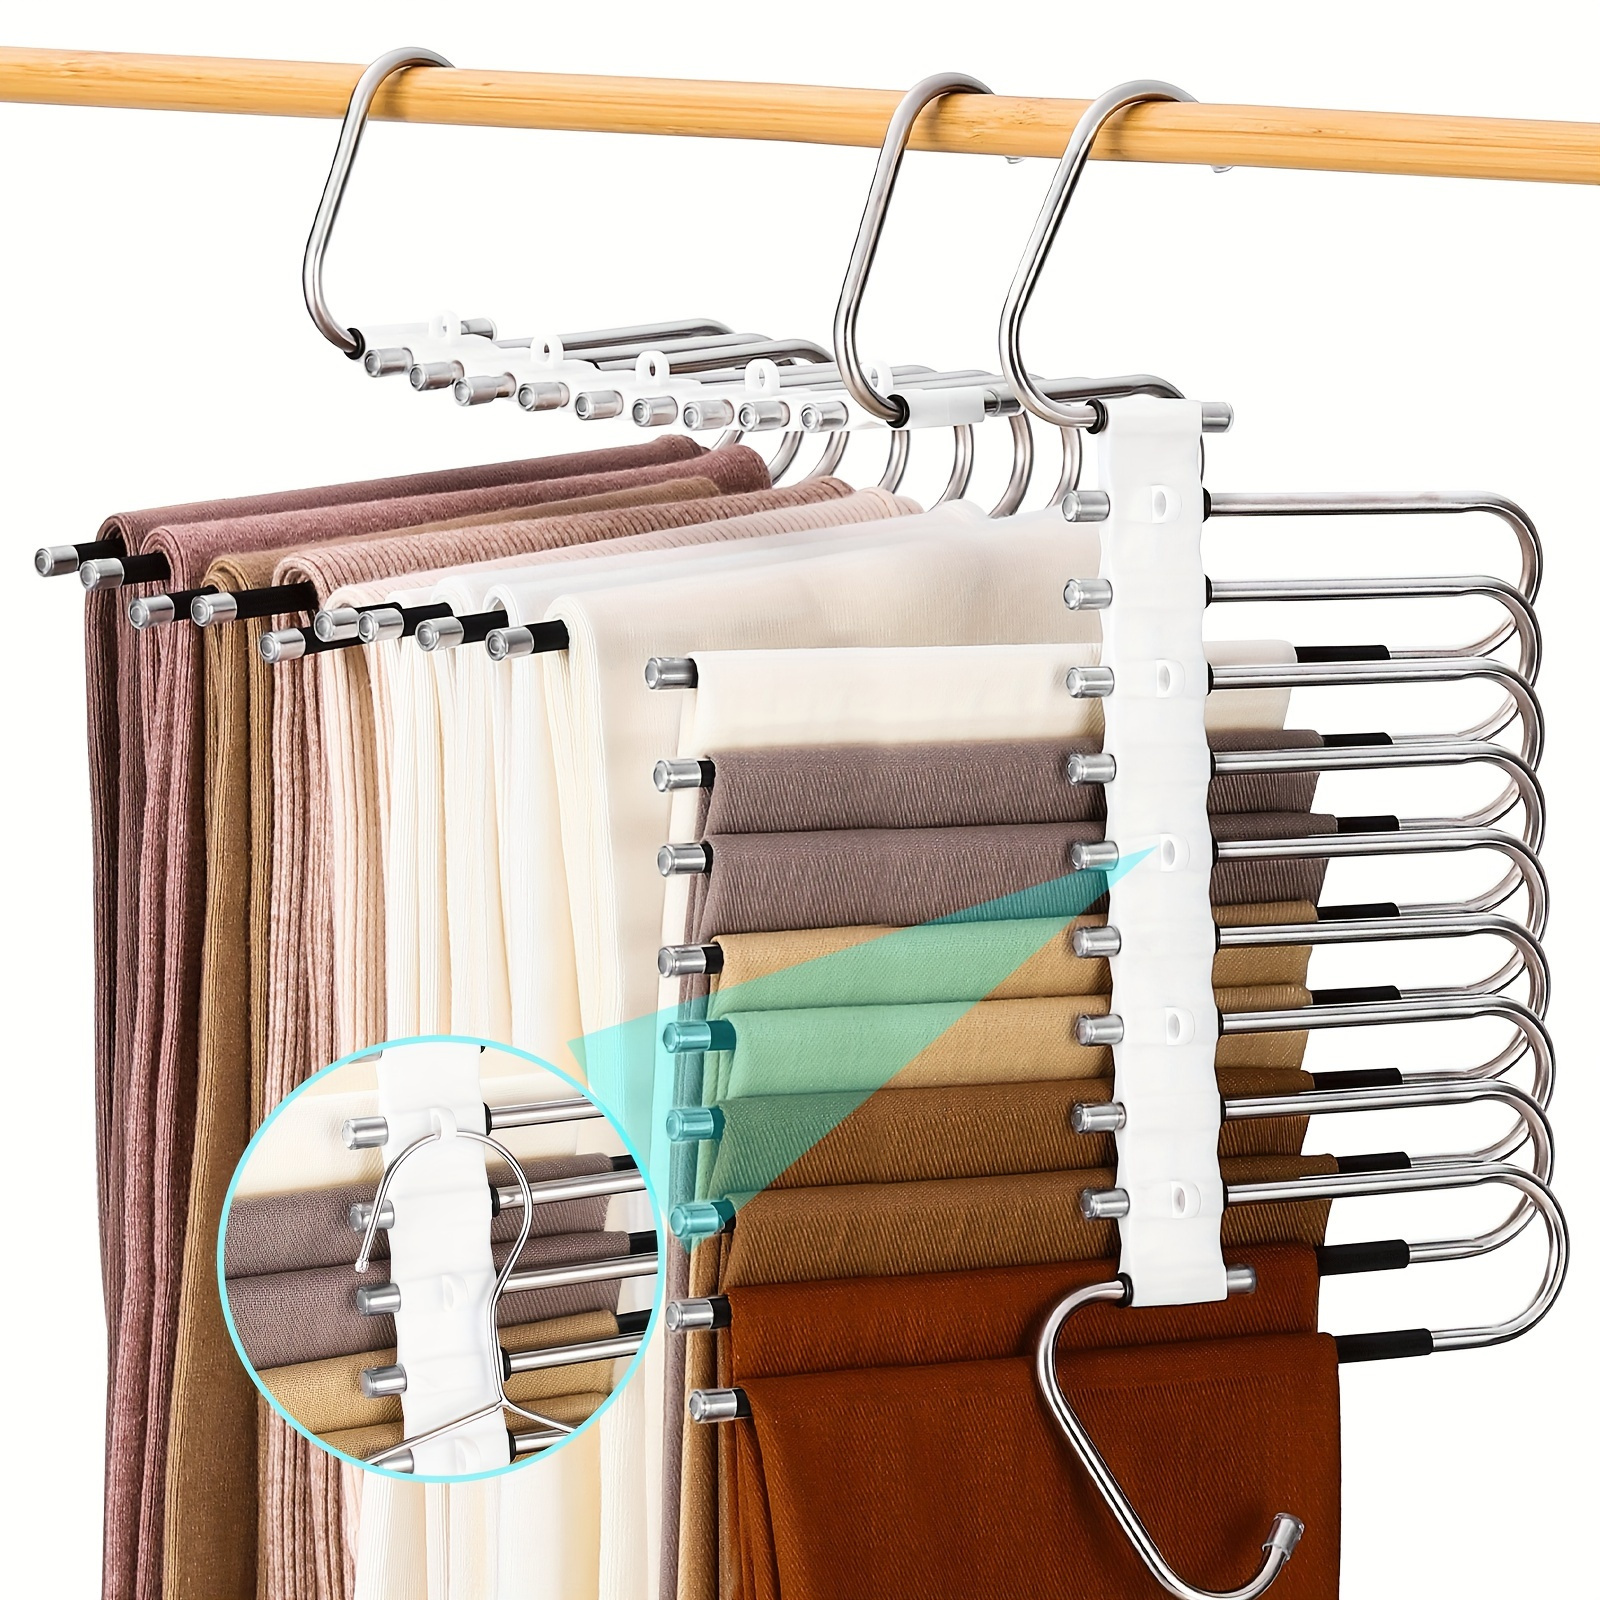 

9-tier Metal Pants Hangers With Non-slip Coating, S-type Space-saving Closet Organizer With 5 Extra Hooks For Jeans, Leggings, Trousers - 80% Space Saving Storage Solution For Home And Stores